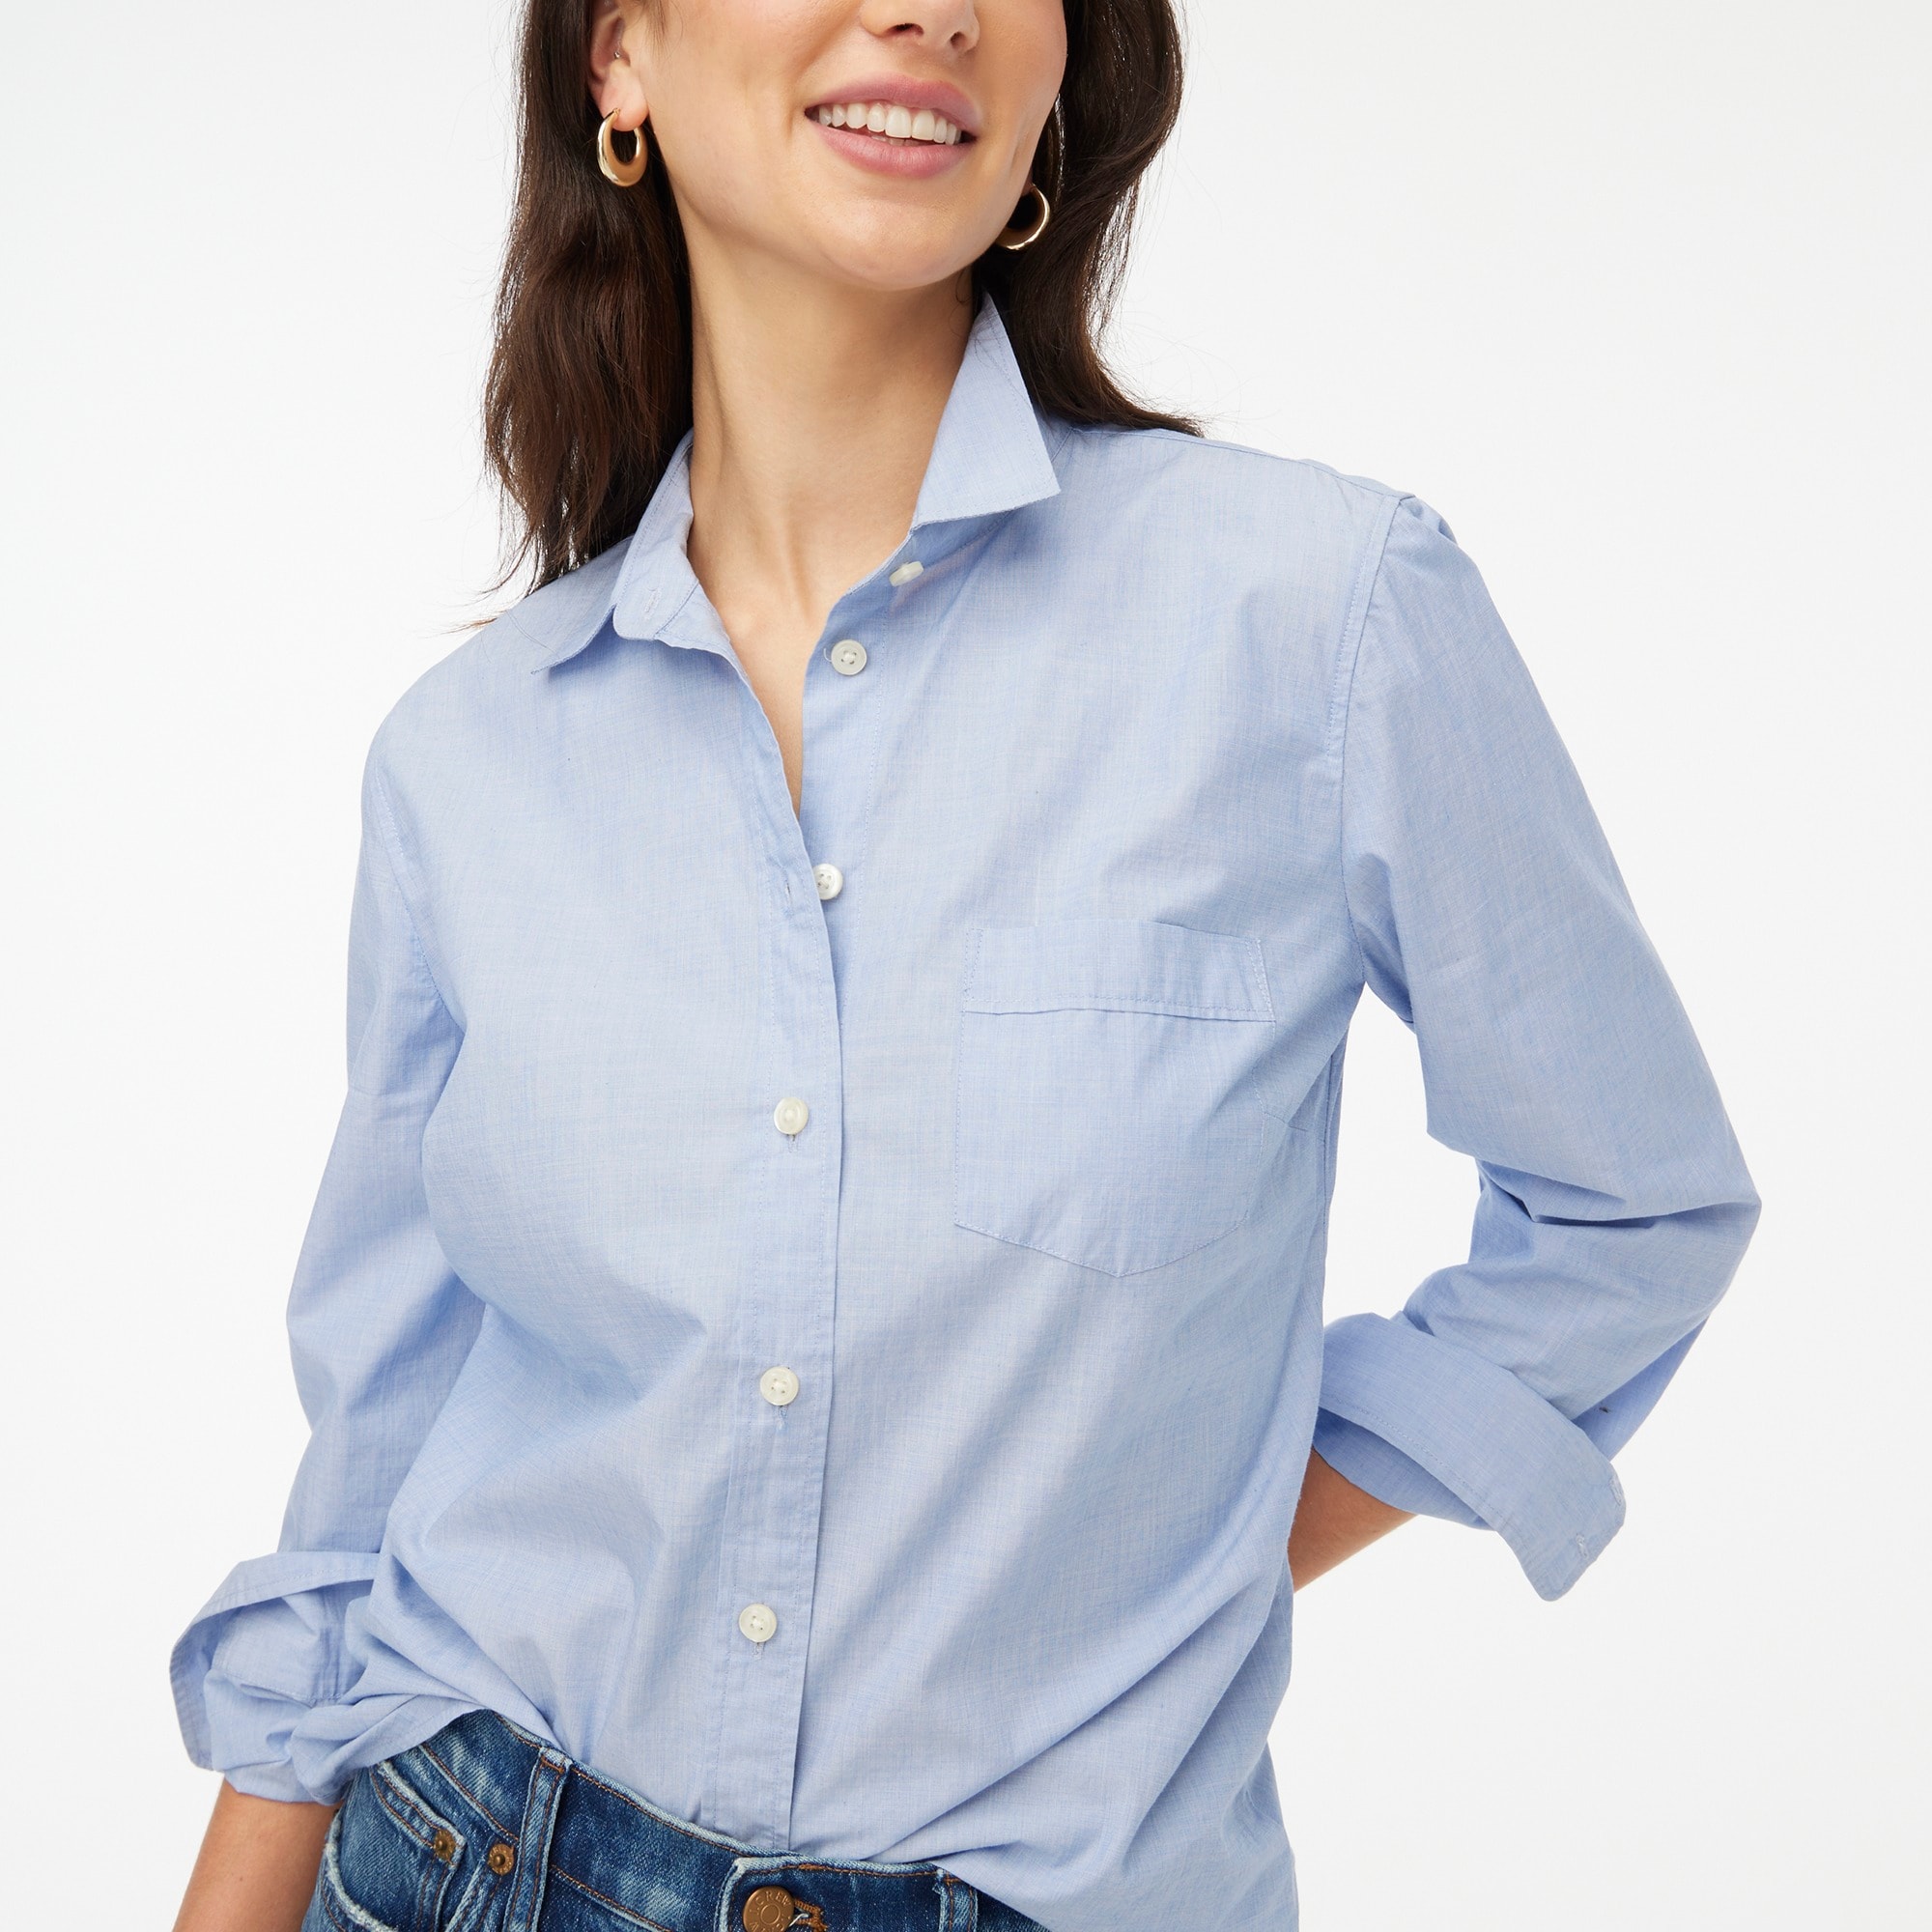  Signature-fit button-up shirt in end-on-end cotton